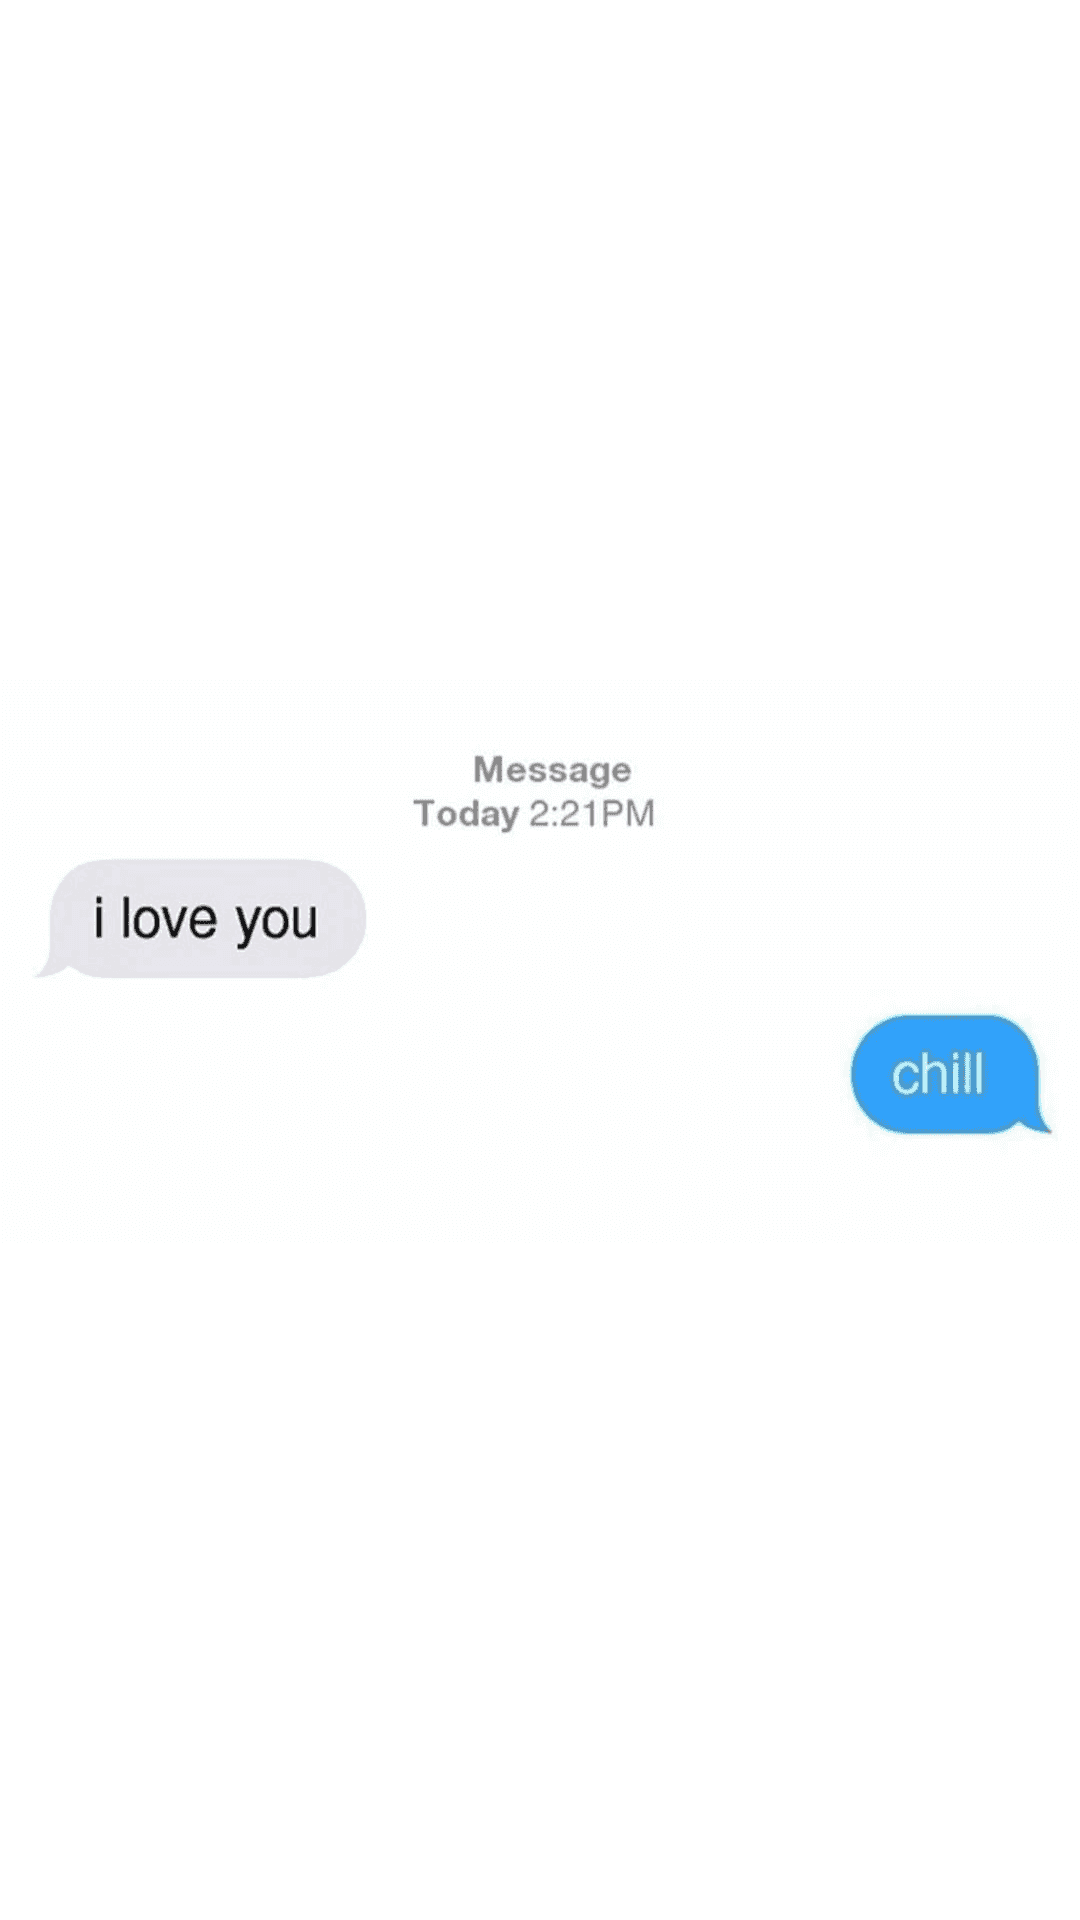 A Text Message With The Words I Love You And Chill